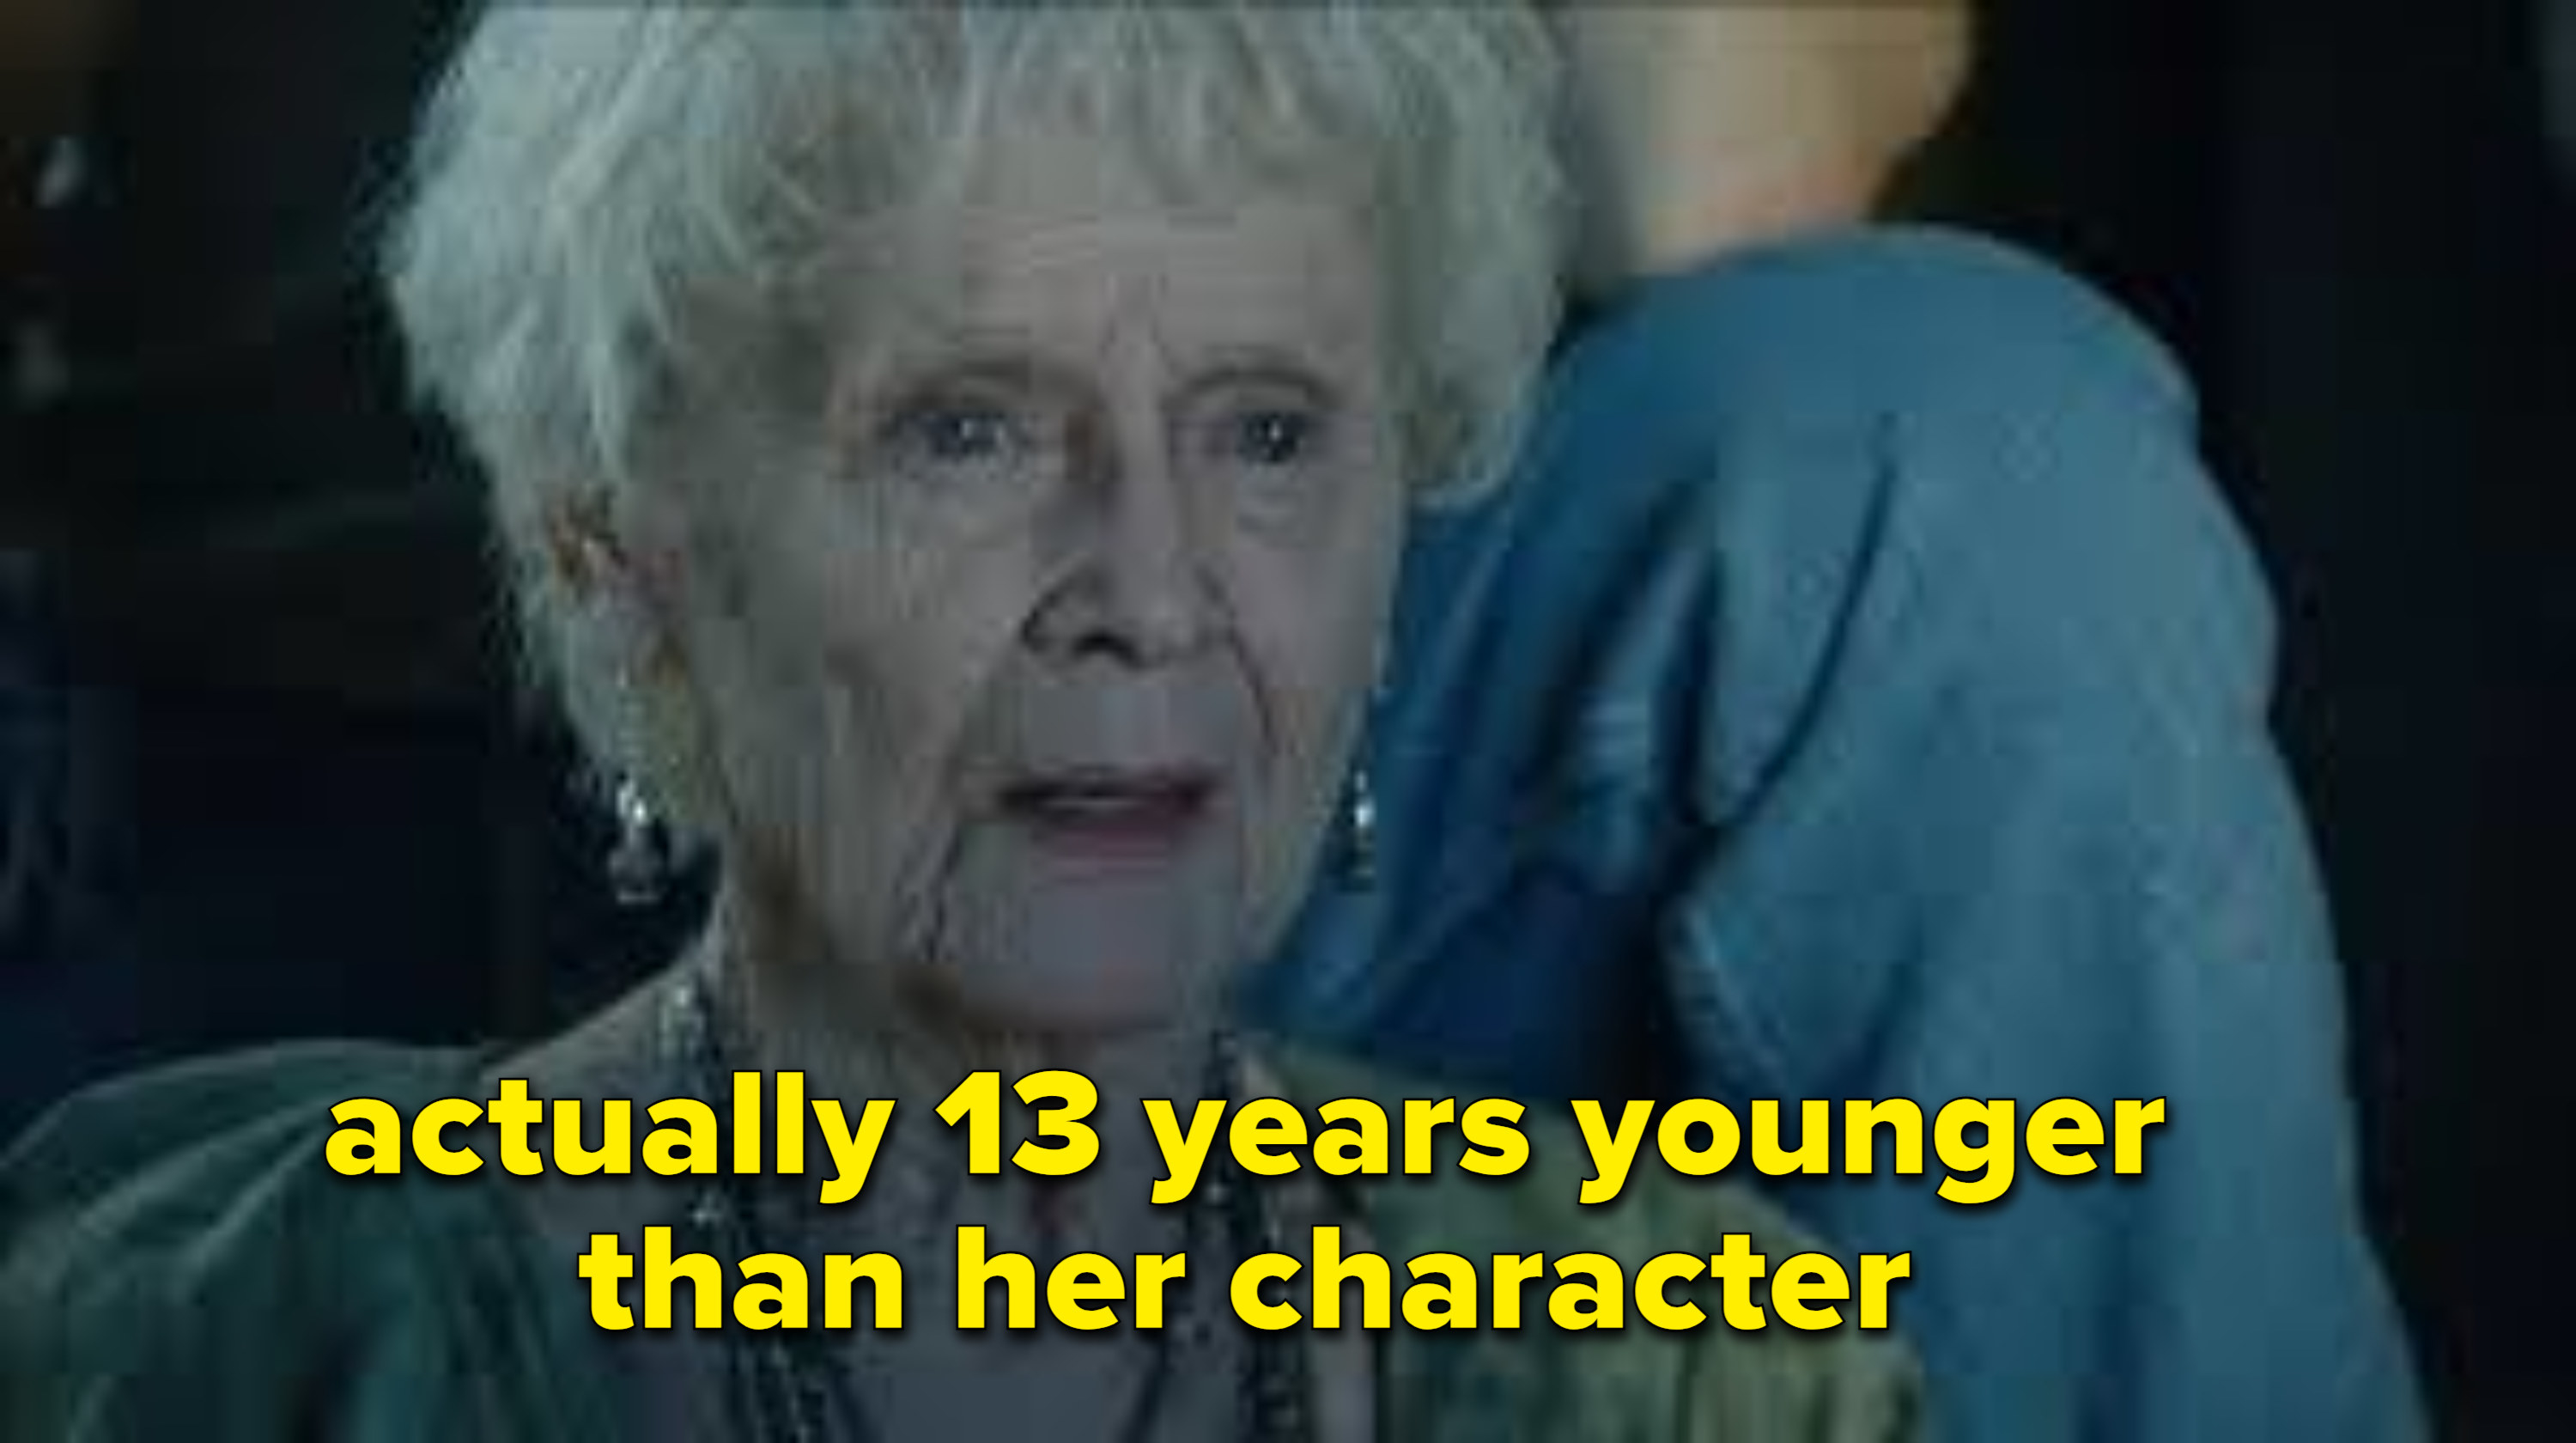 Gloria Stuart playing a character 13 years older than her